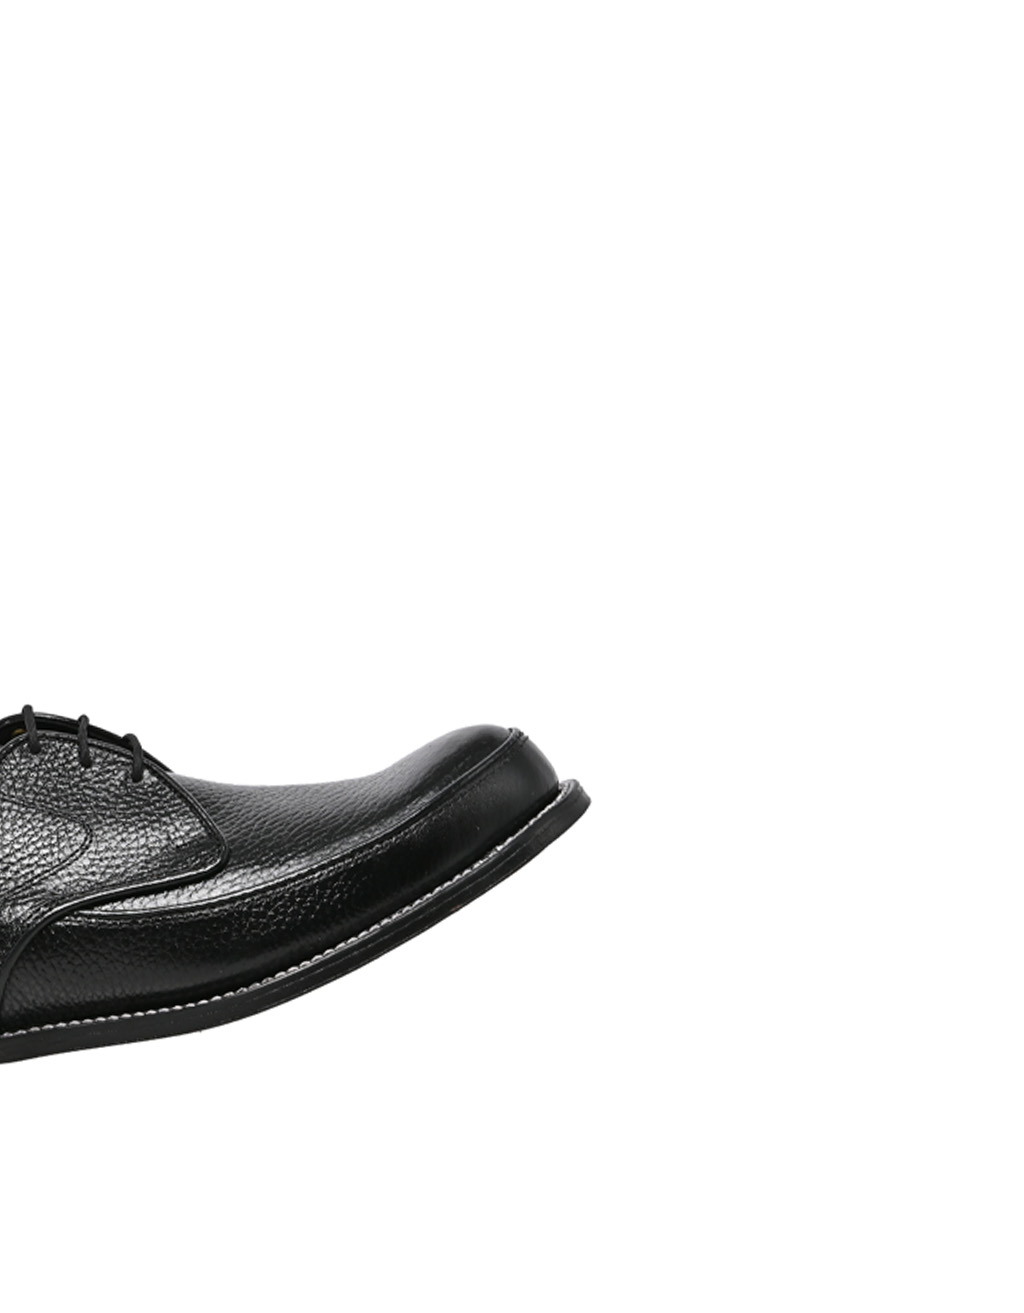 Mens Barker, Chesne, Formal Black Lace Up - Bolton Shoes